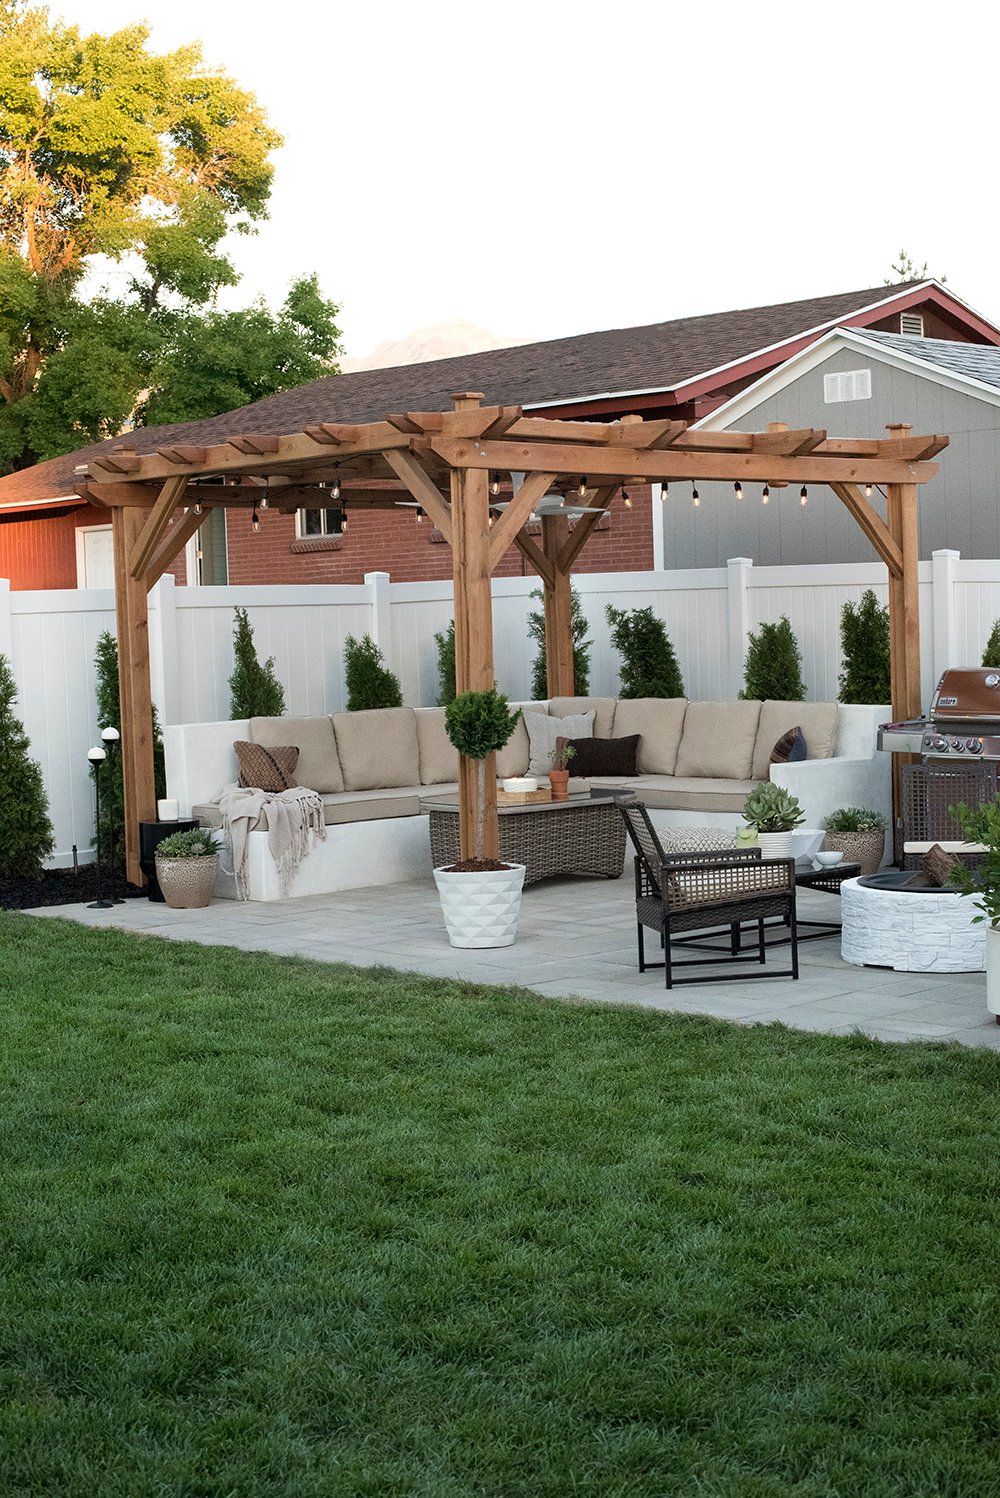 Our Backyard Reveal & Get the Look - Room for Tuesday